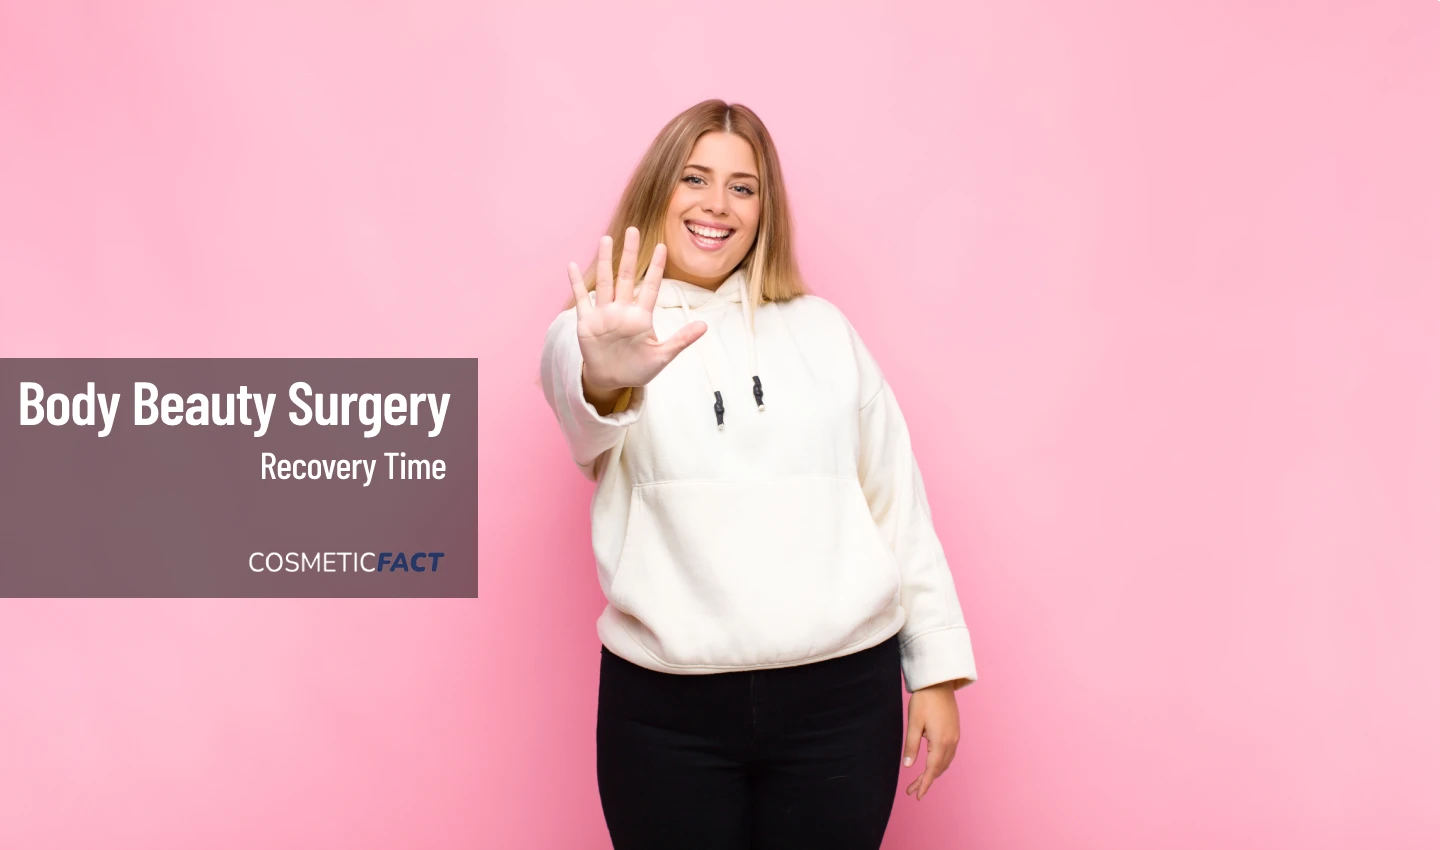 A woman shows her hands in a stop sign gesture, representing the importance of understanding body contouring surgery recovery time.